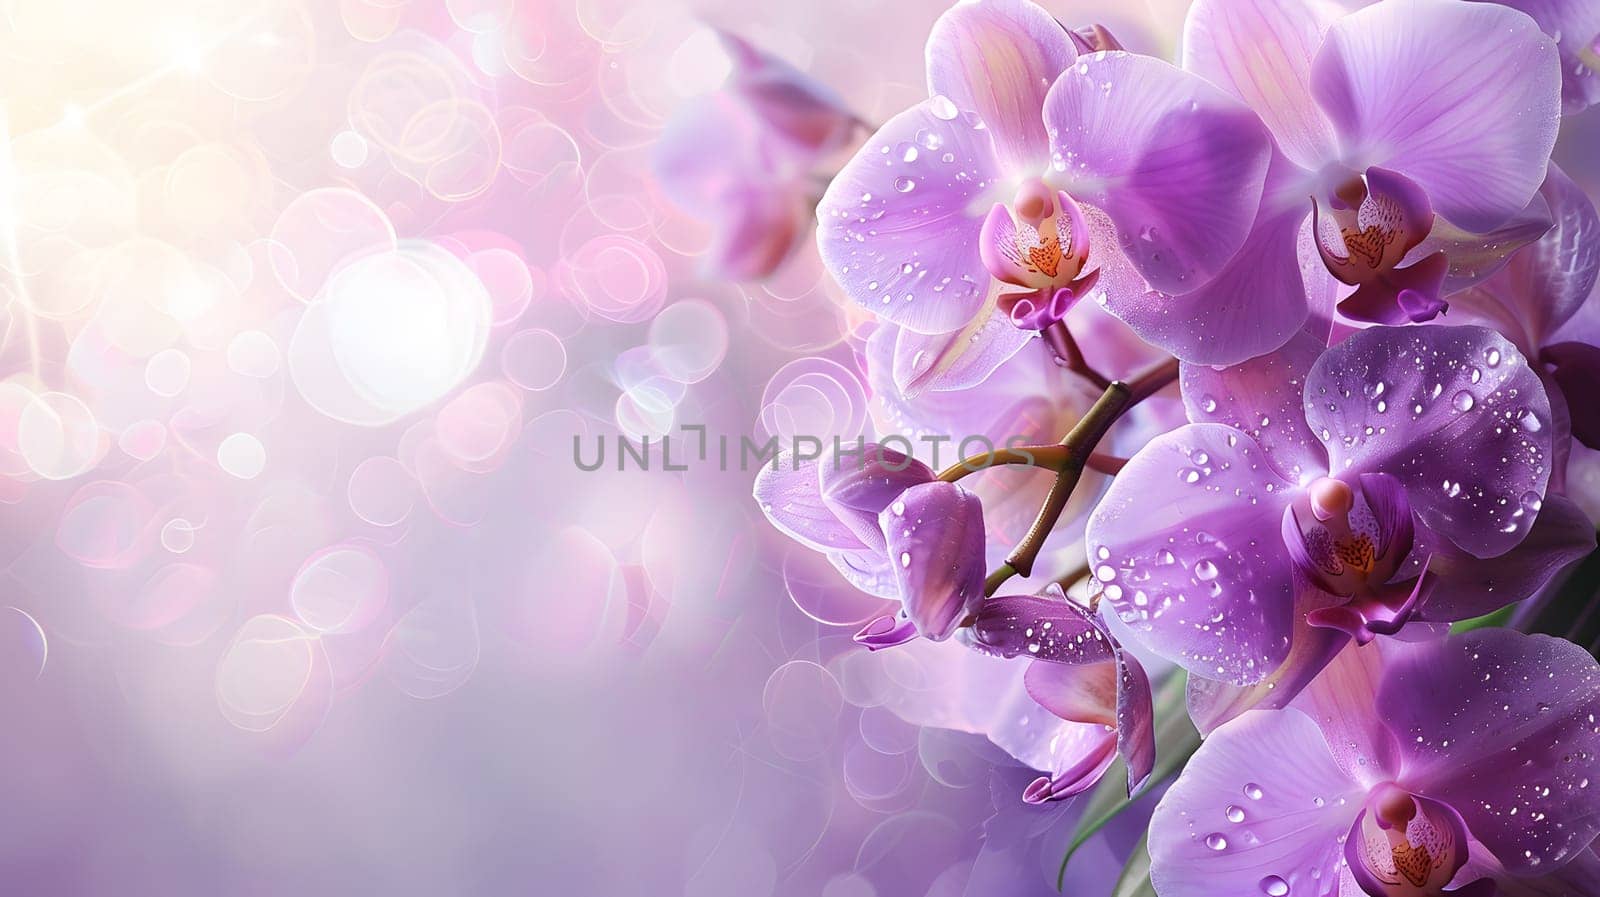 A cluster of vibrant purple orchids with water droplets on their petals, set against a purple background, showcasing the beauty of this flowering plant